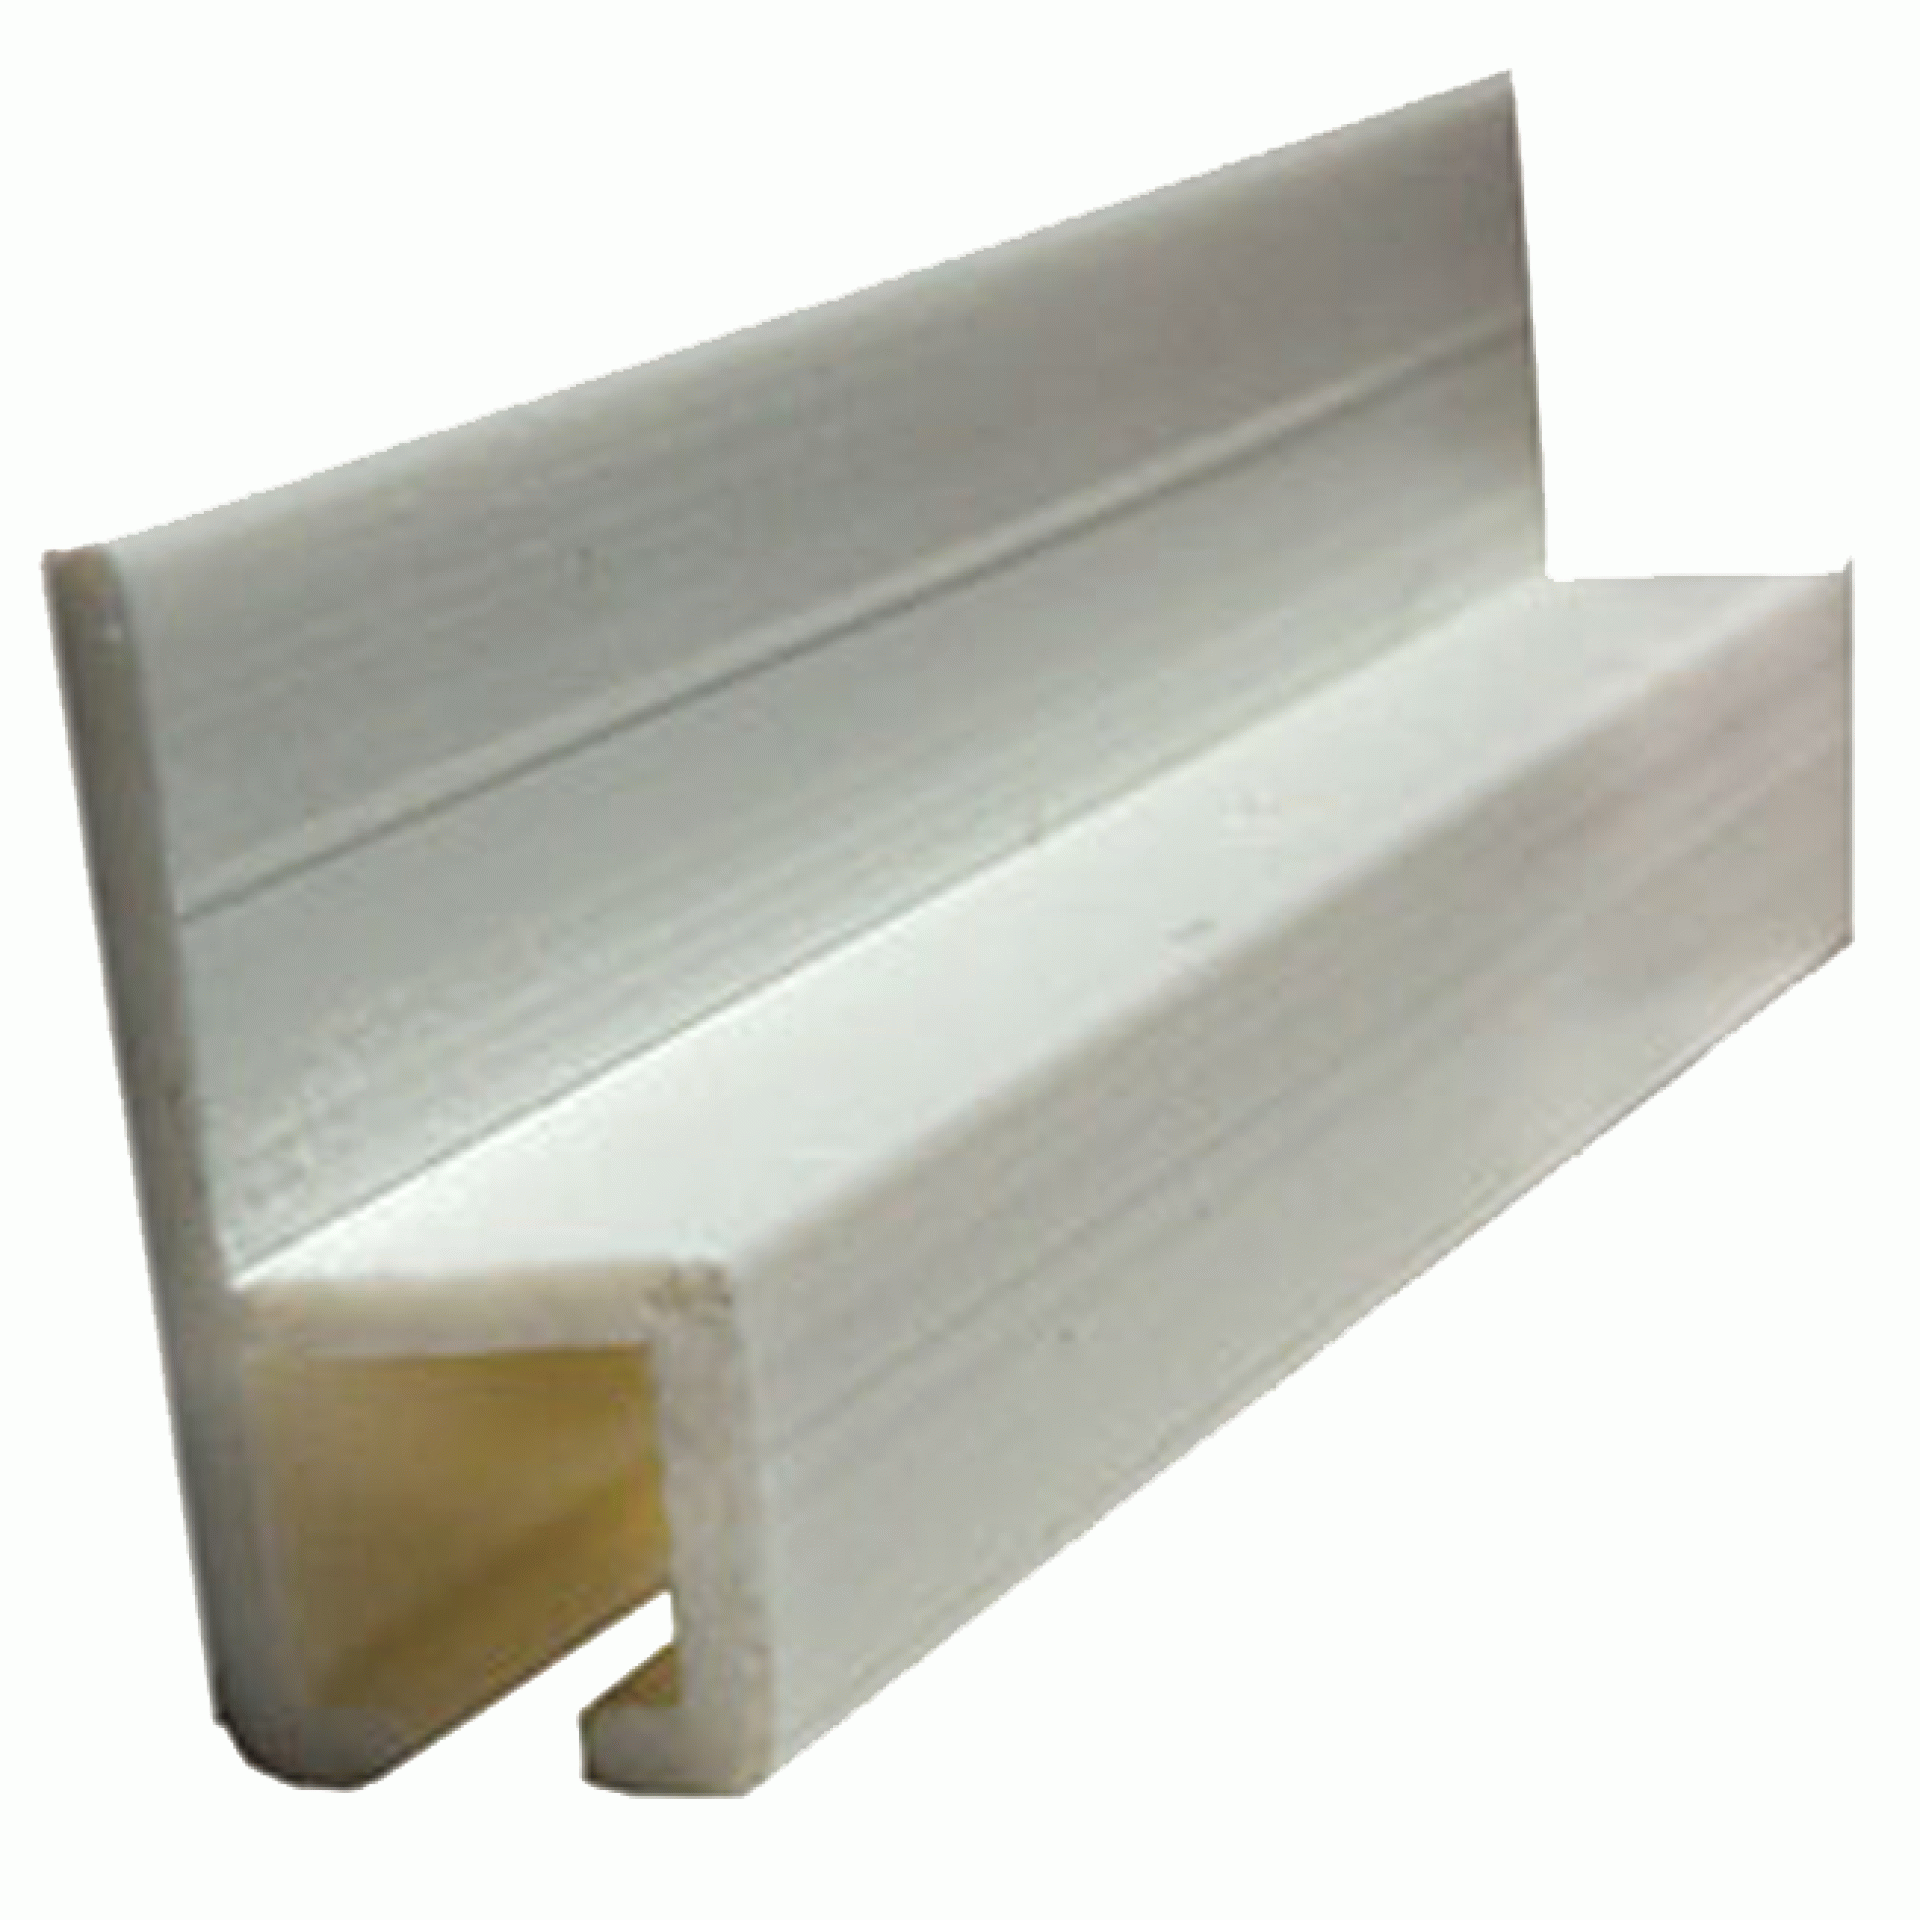 J R PRODUCTS | 80351 | TRACK WALL MOUNTED SLIDE 96" WHITE TYPE "C"